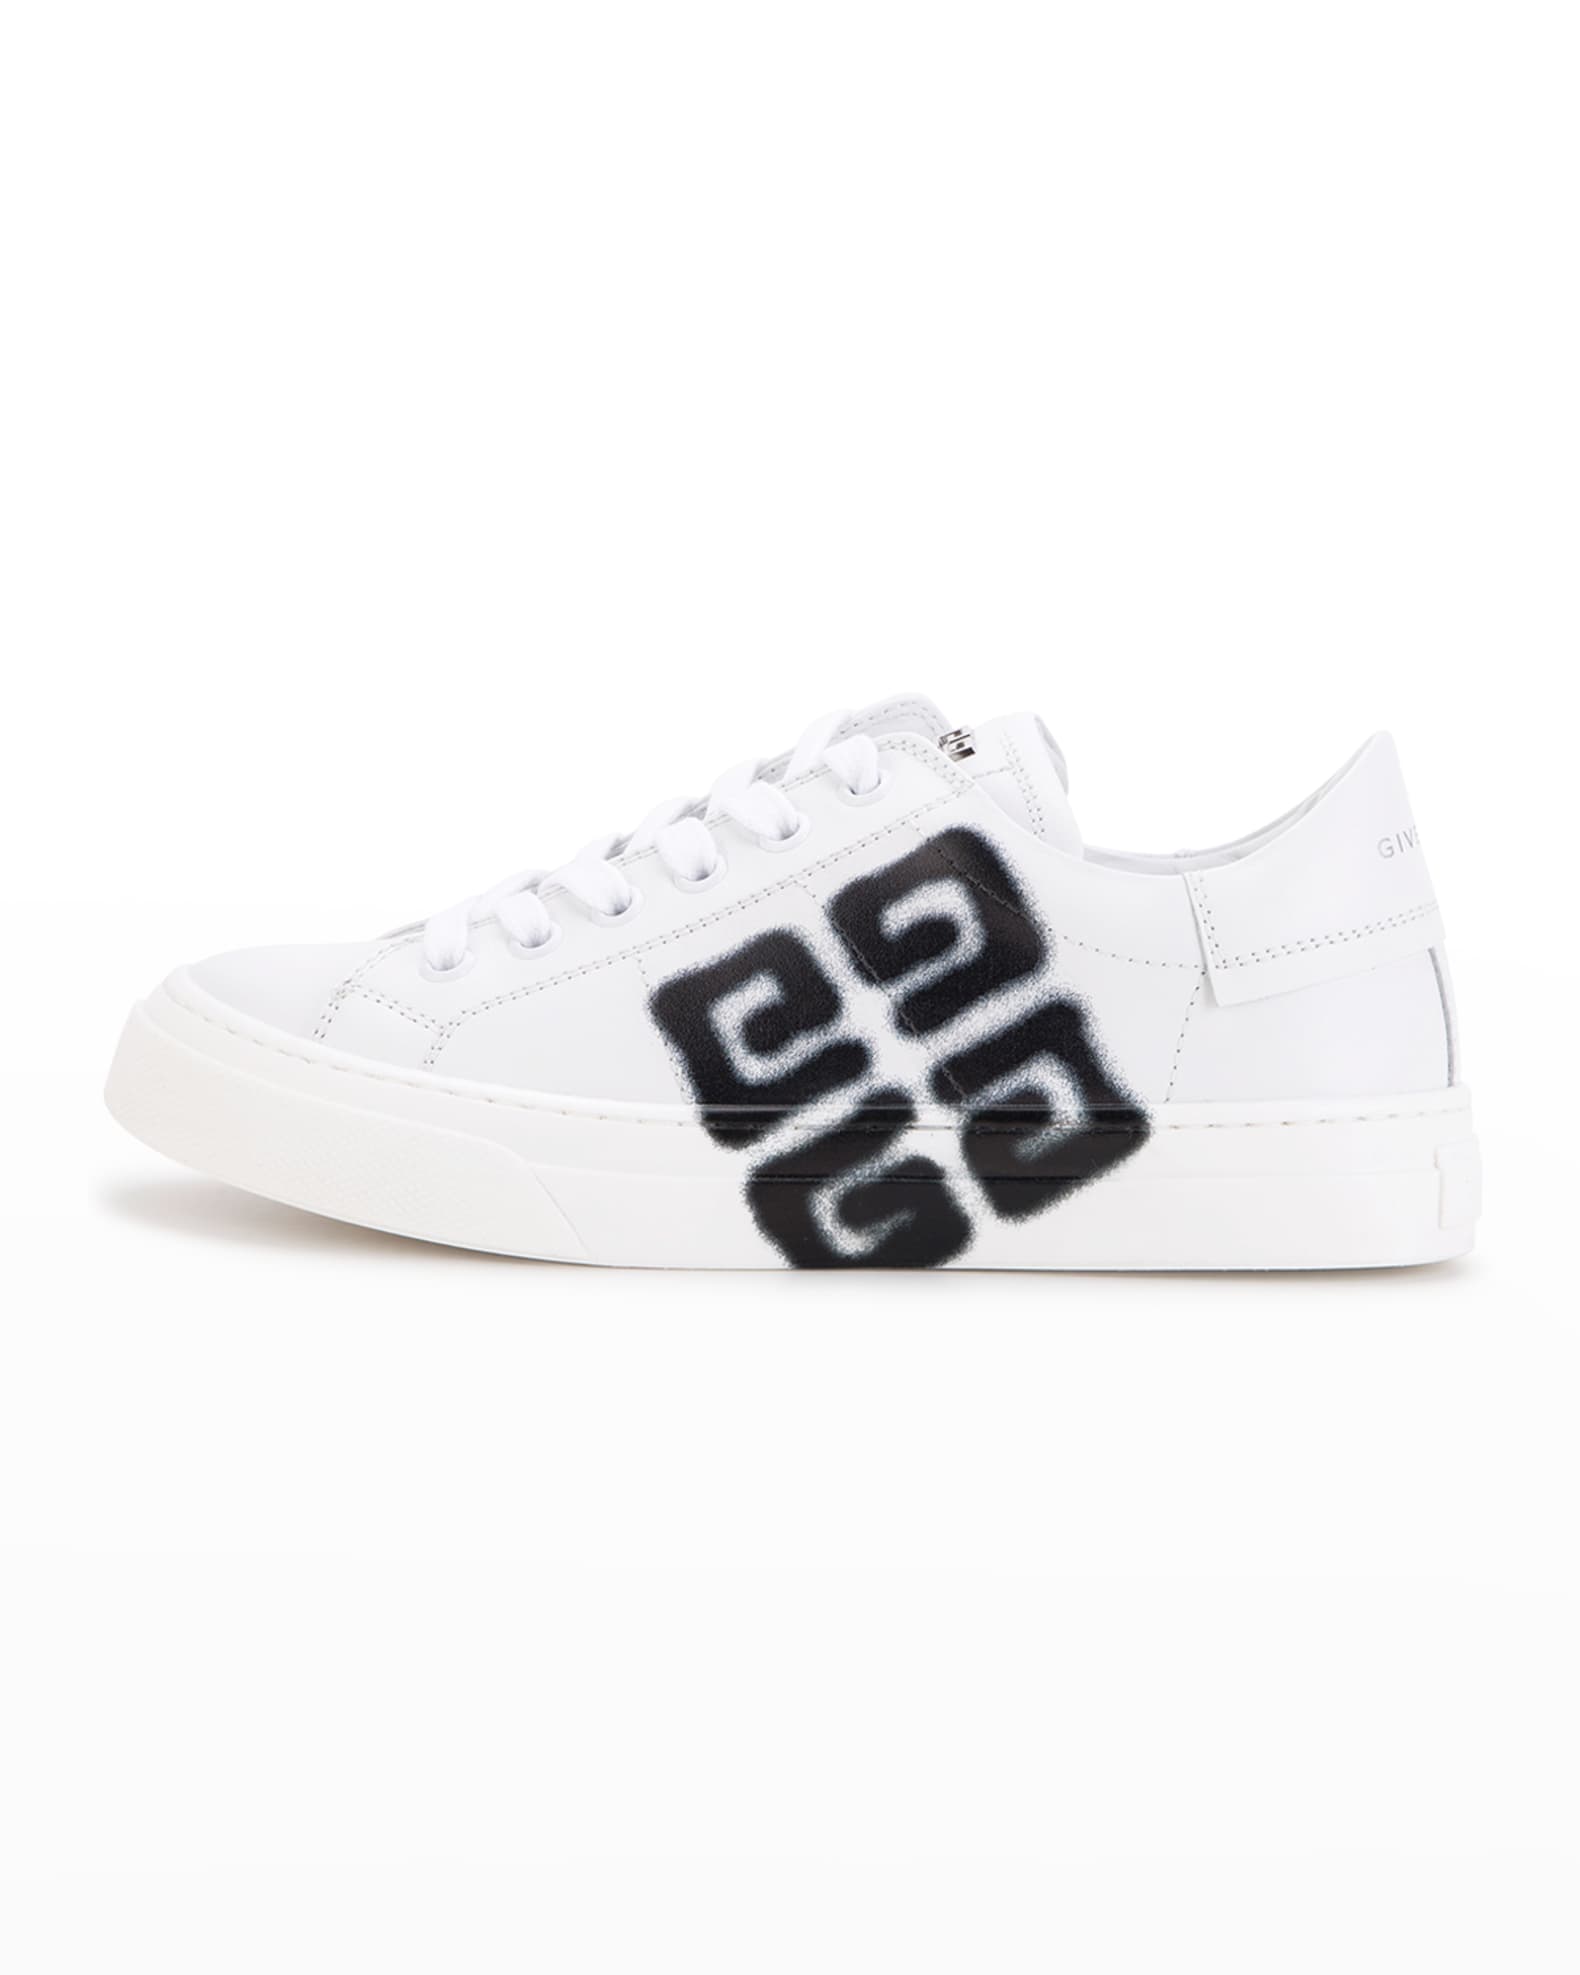 Givenchy x CHITO Boy's Blurred 4G Sneakers, Toddlers/Kids | Neiman Marcus